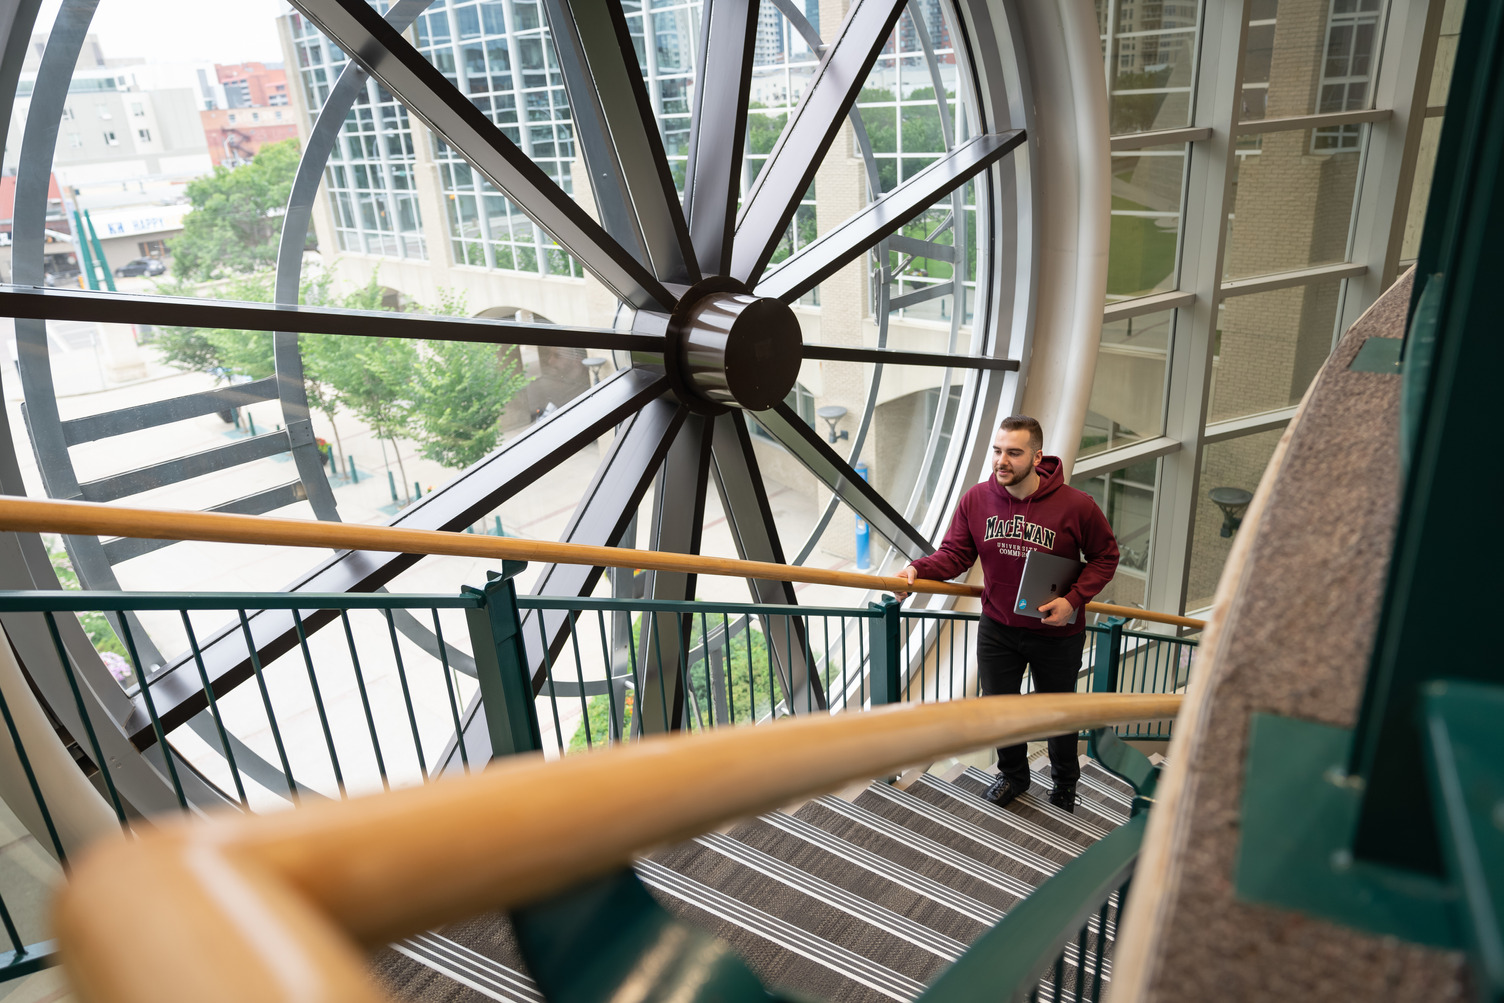 Image of MacEwan Clock from inside on the library stairs